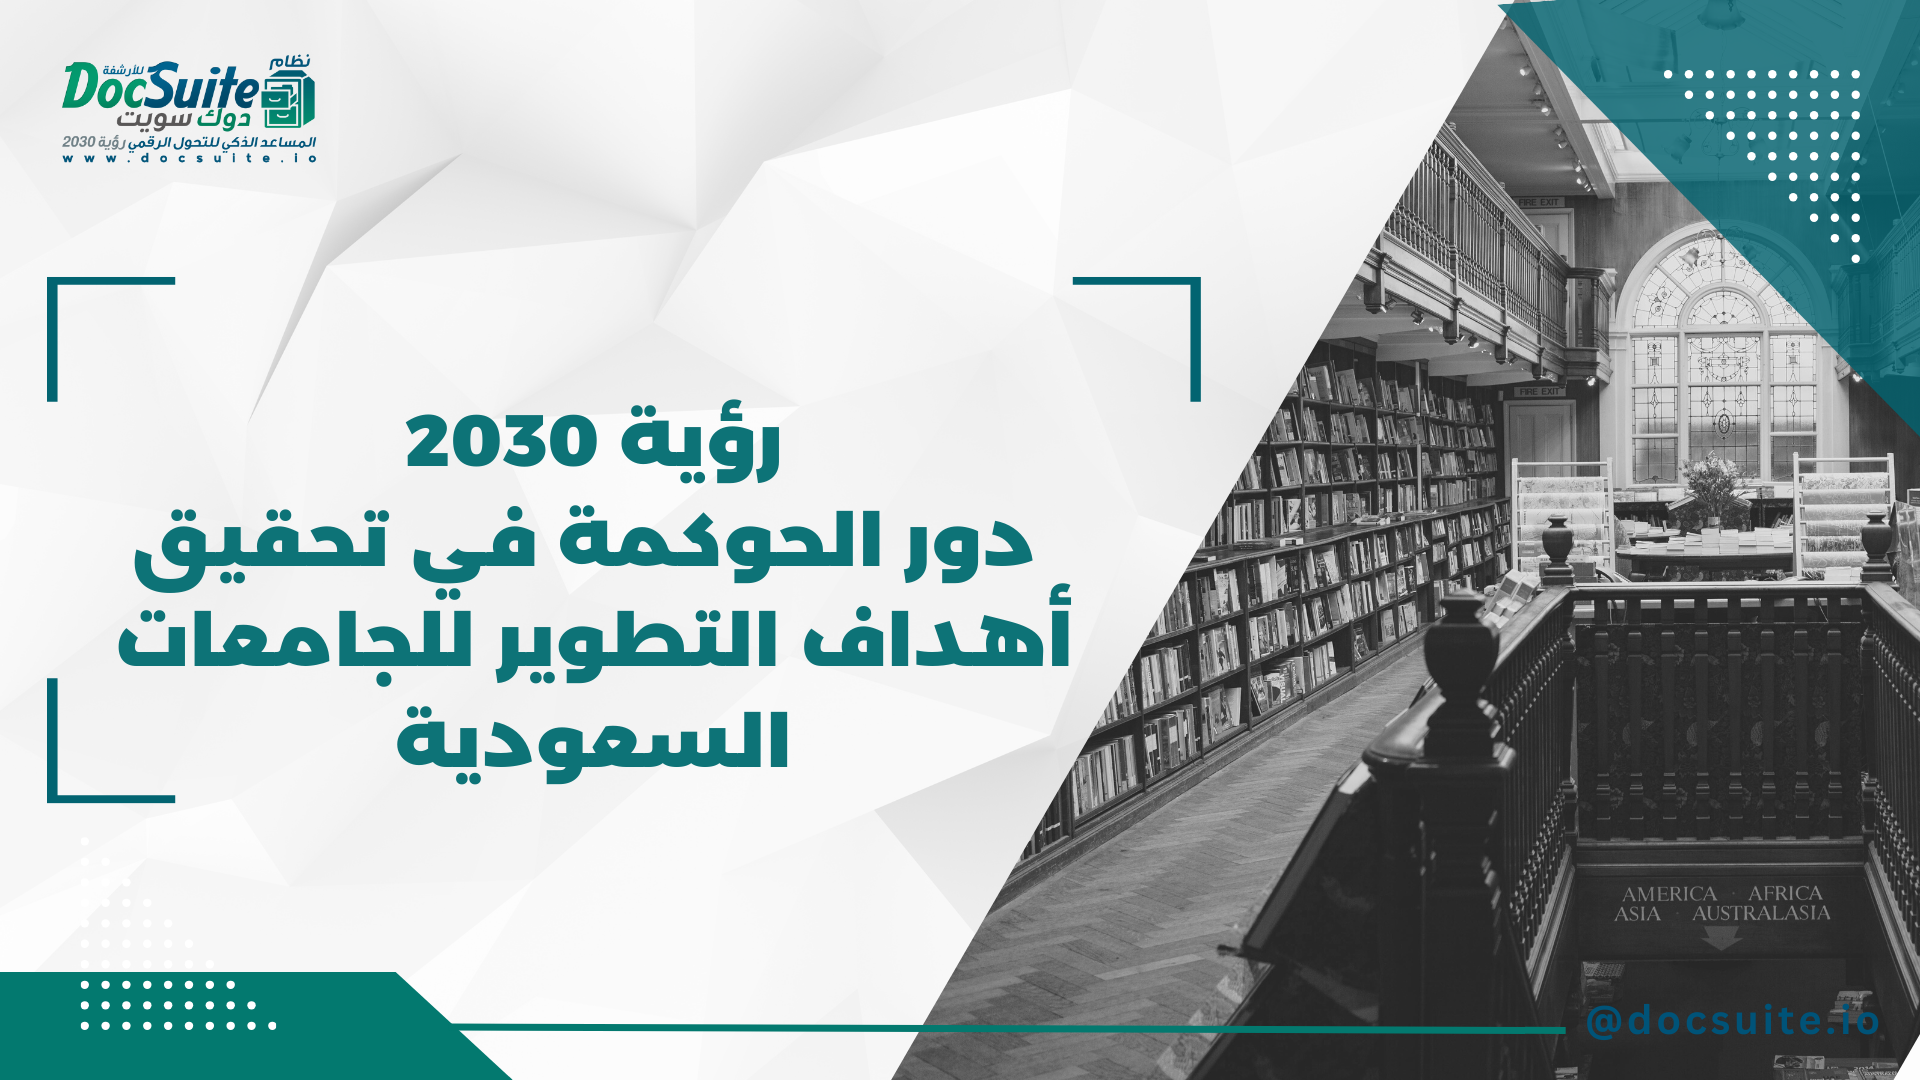 Vision 2030: The role of governance in achieving the development goals of Saudi universities